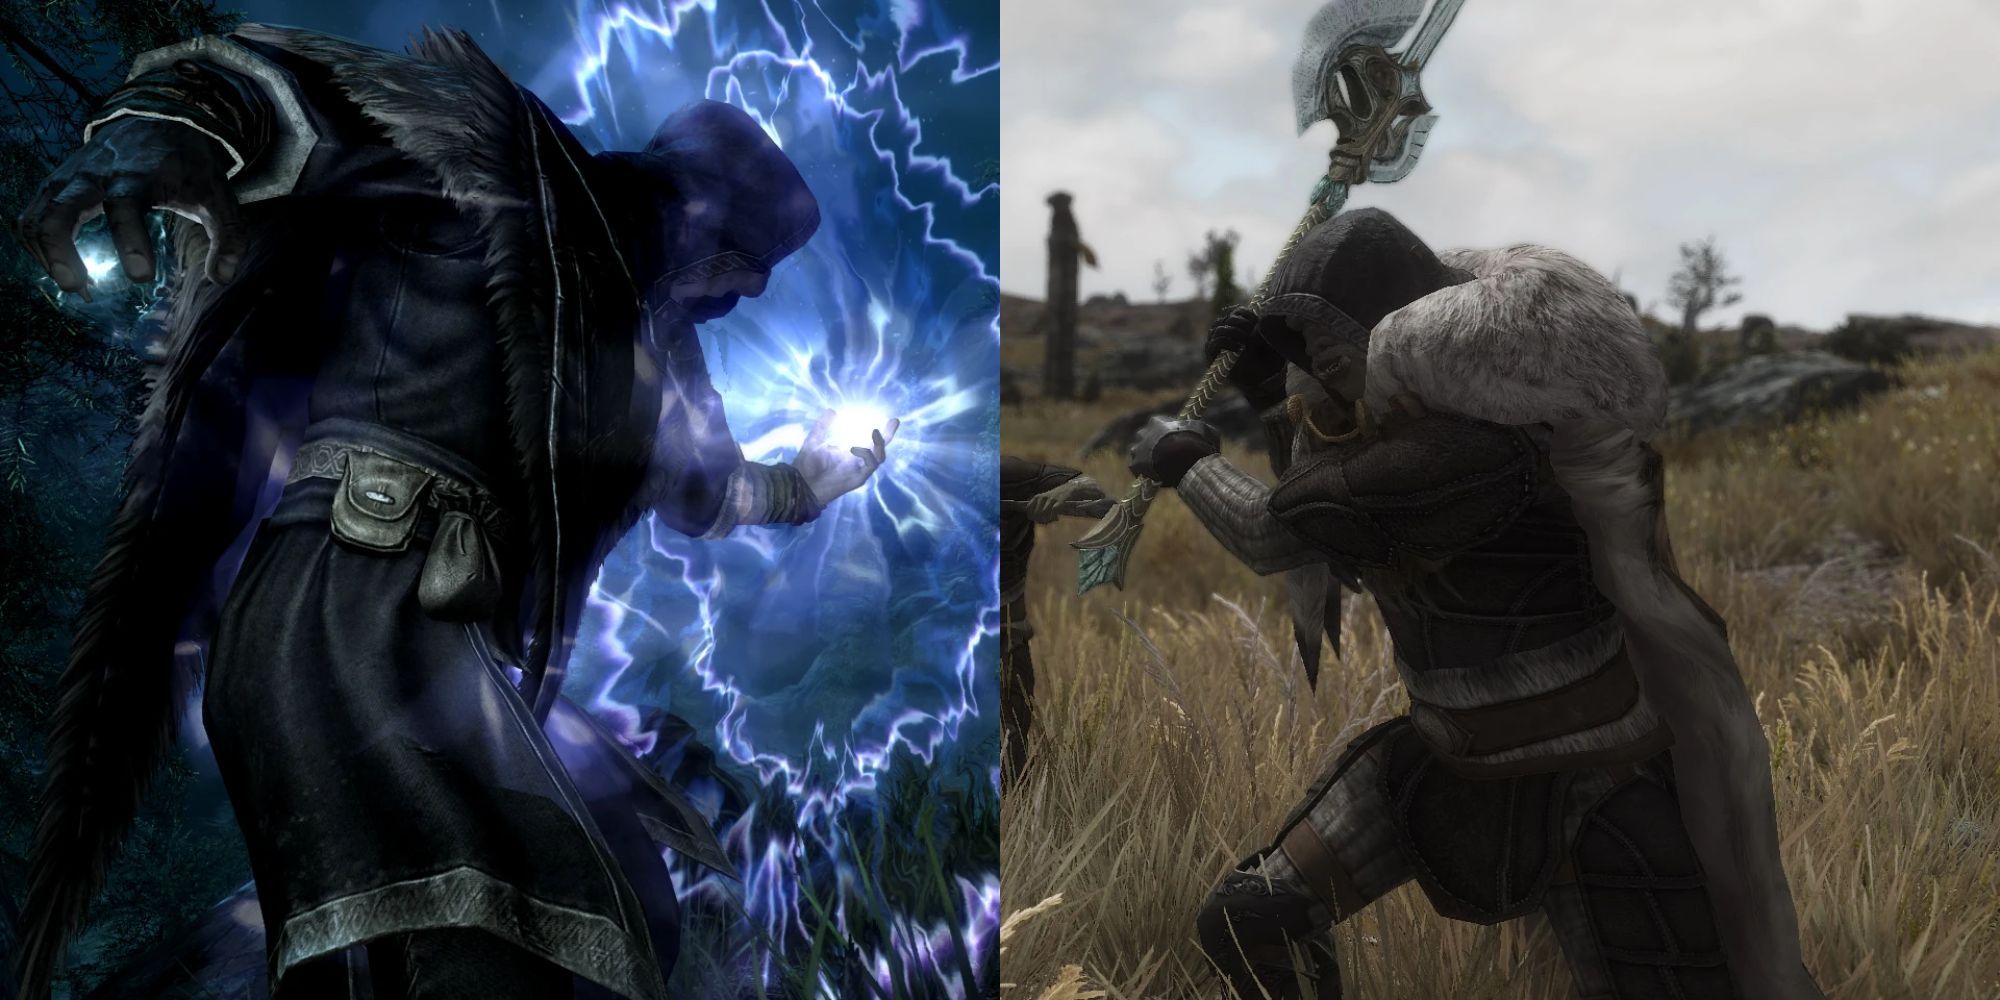 A collage showing a sorcerer casting a spell and a warrior wielding an axe.